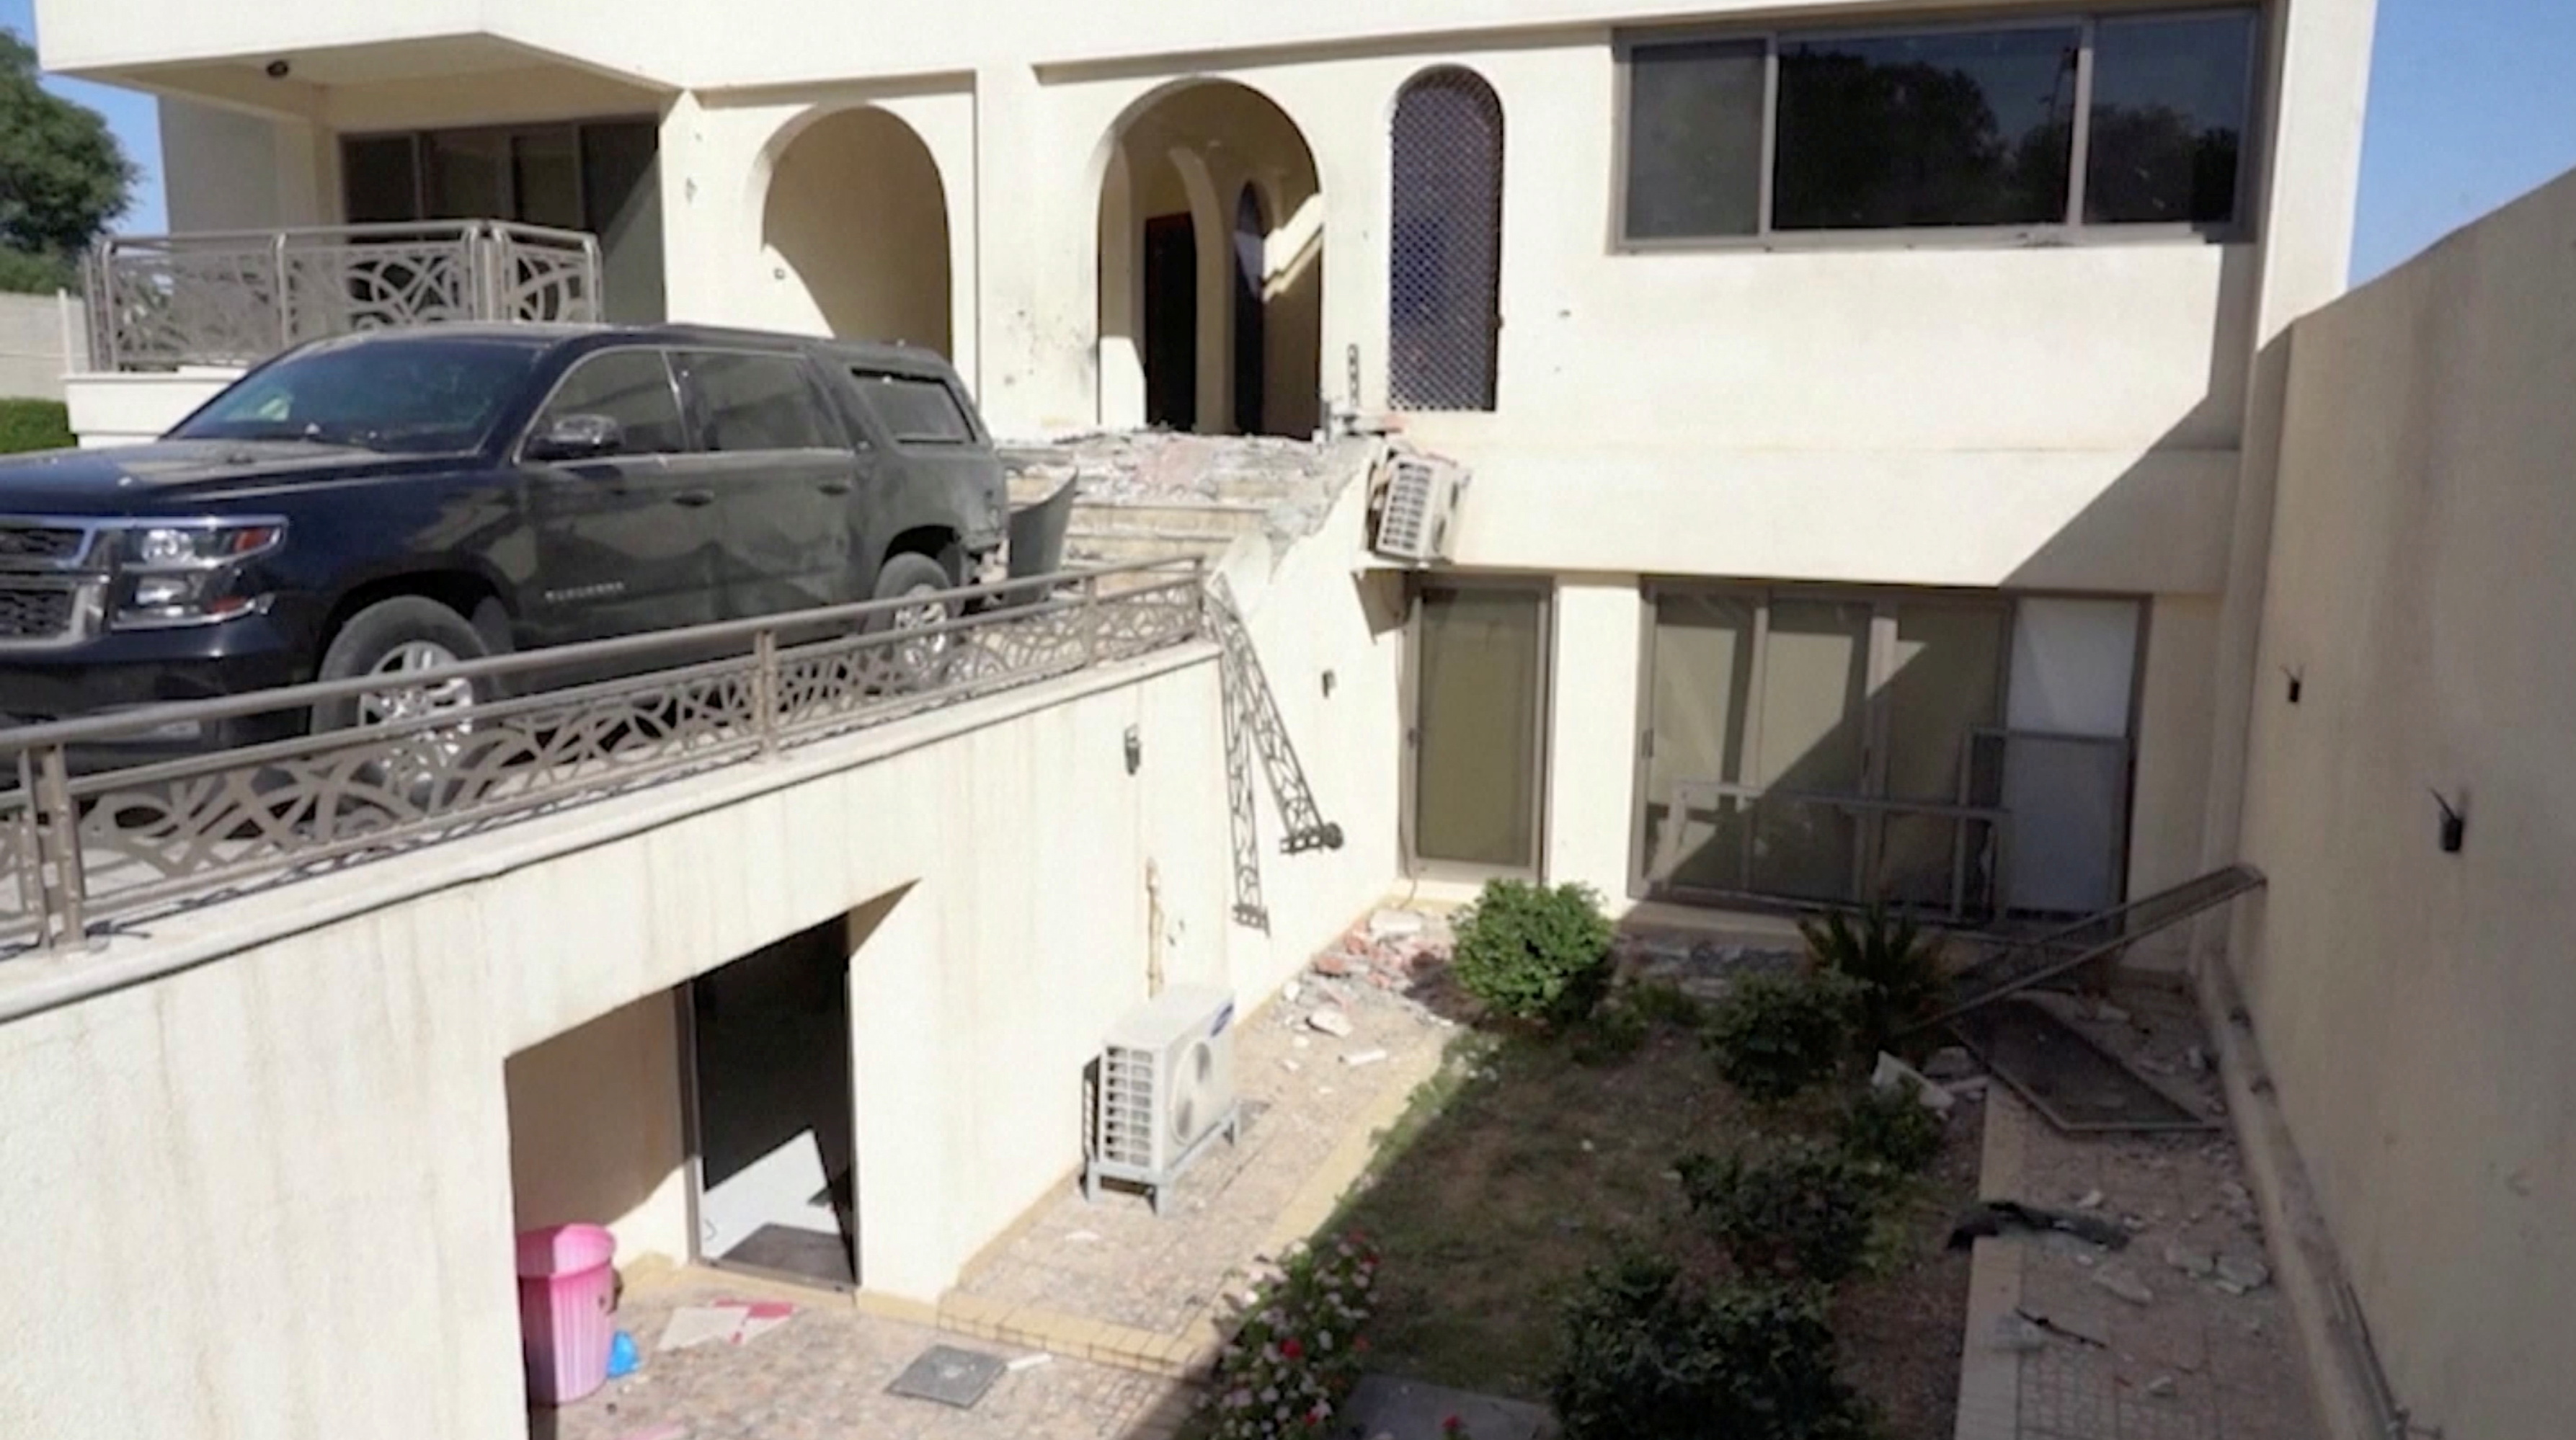 Destruction at Iraqi PM residence following drone attack, in Baghdad